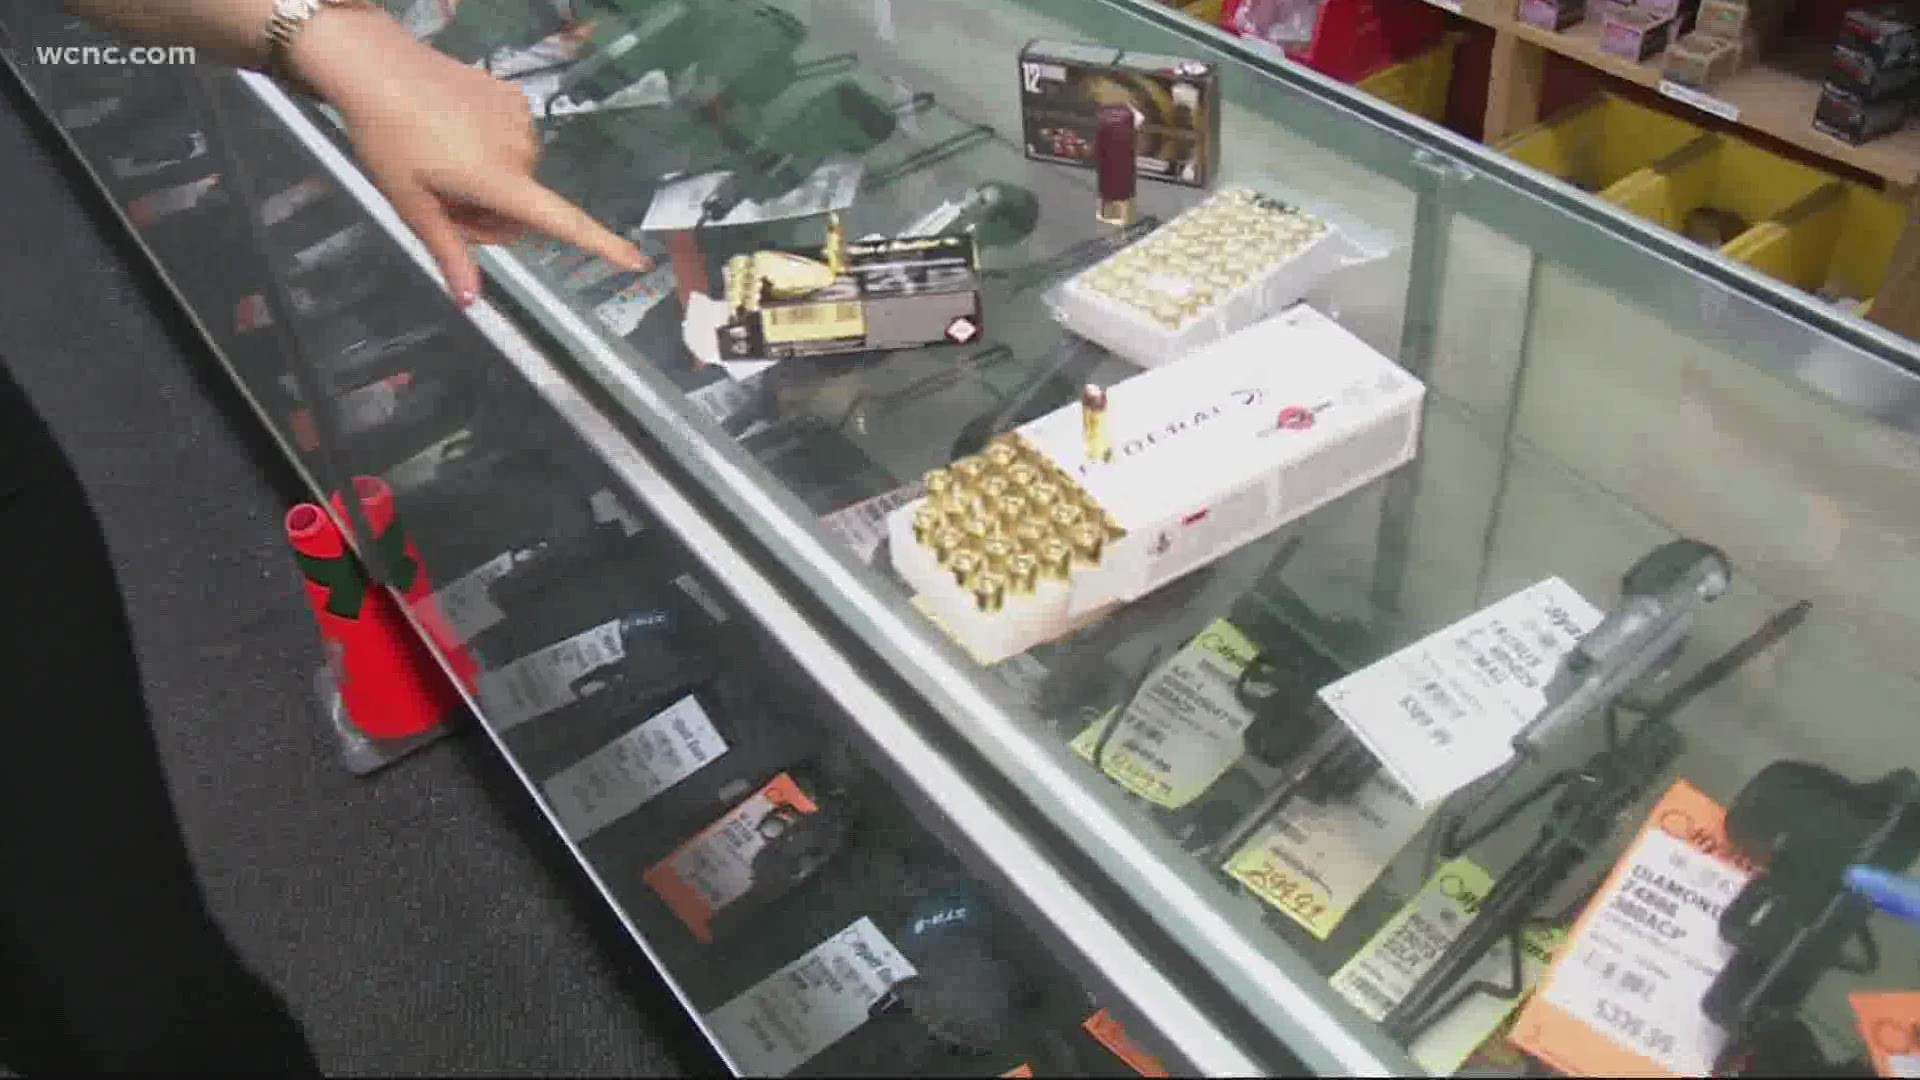 A spike in gun sales is being seen across the country since protests and violence started.